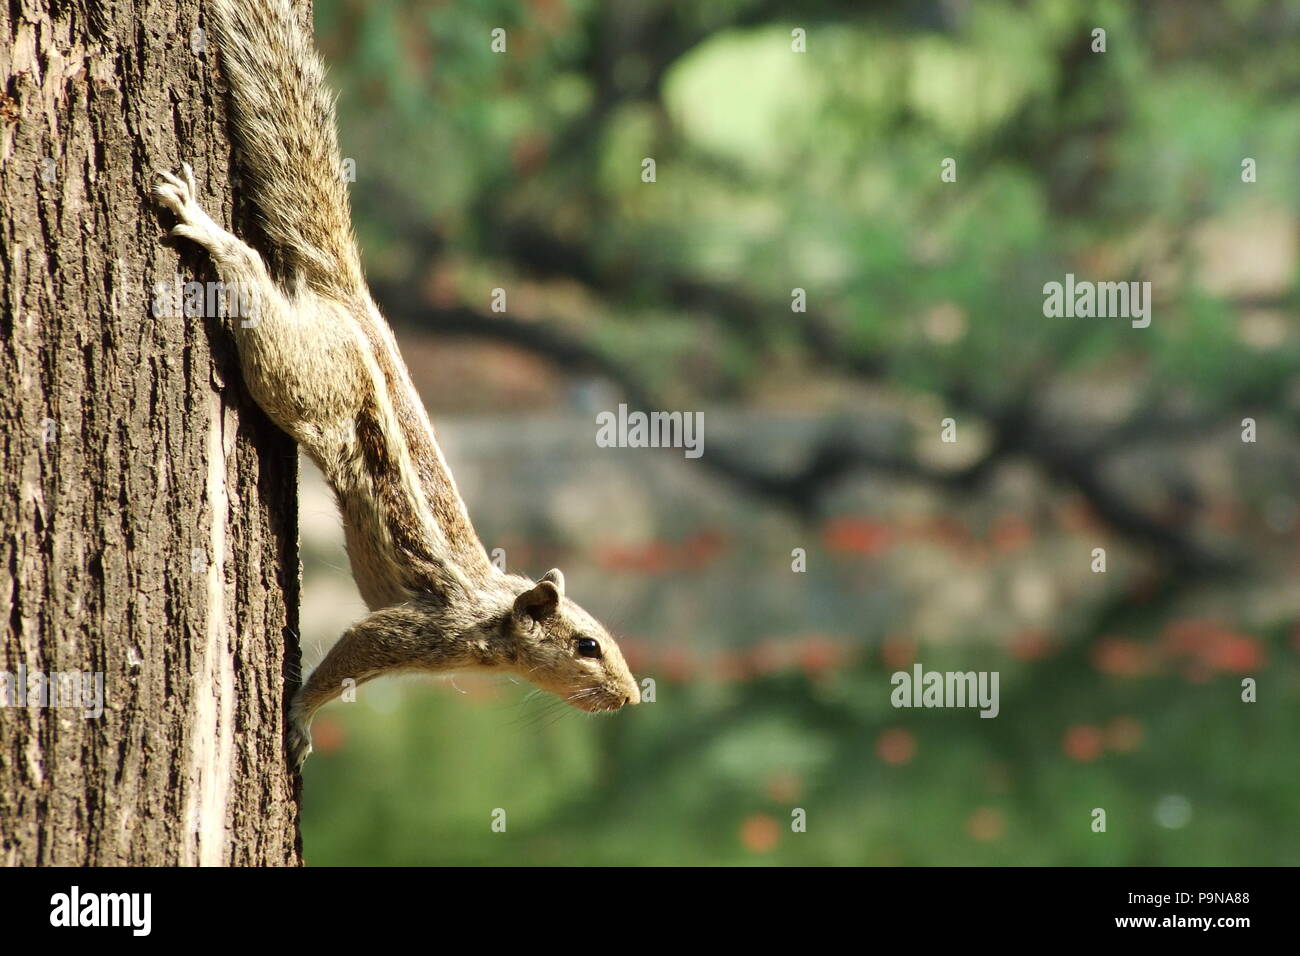 A squirrel about to jump in a park in India Stock Photo